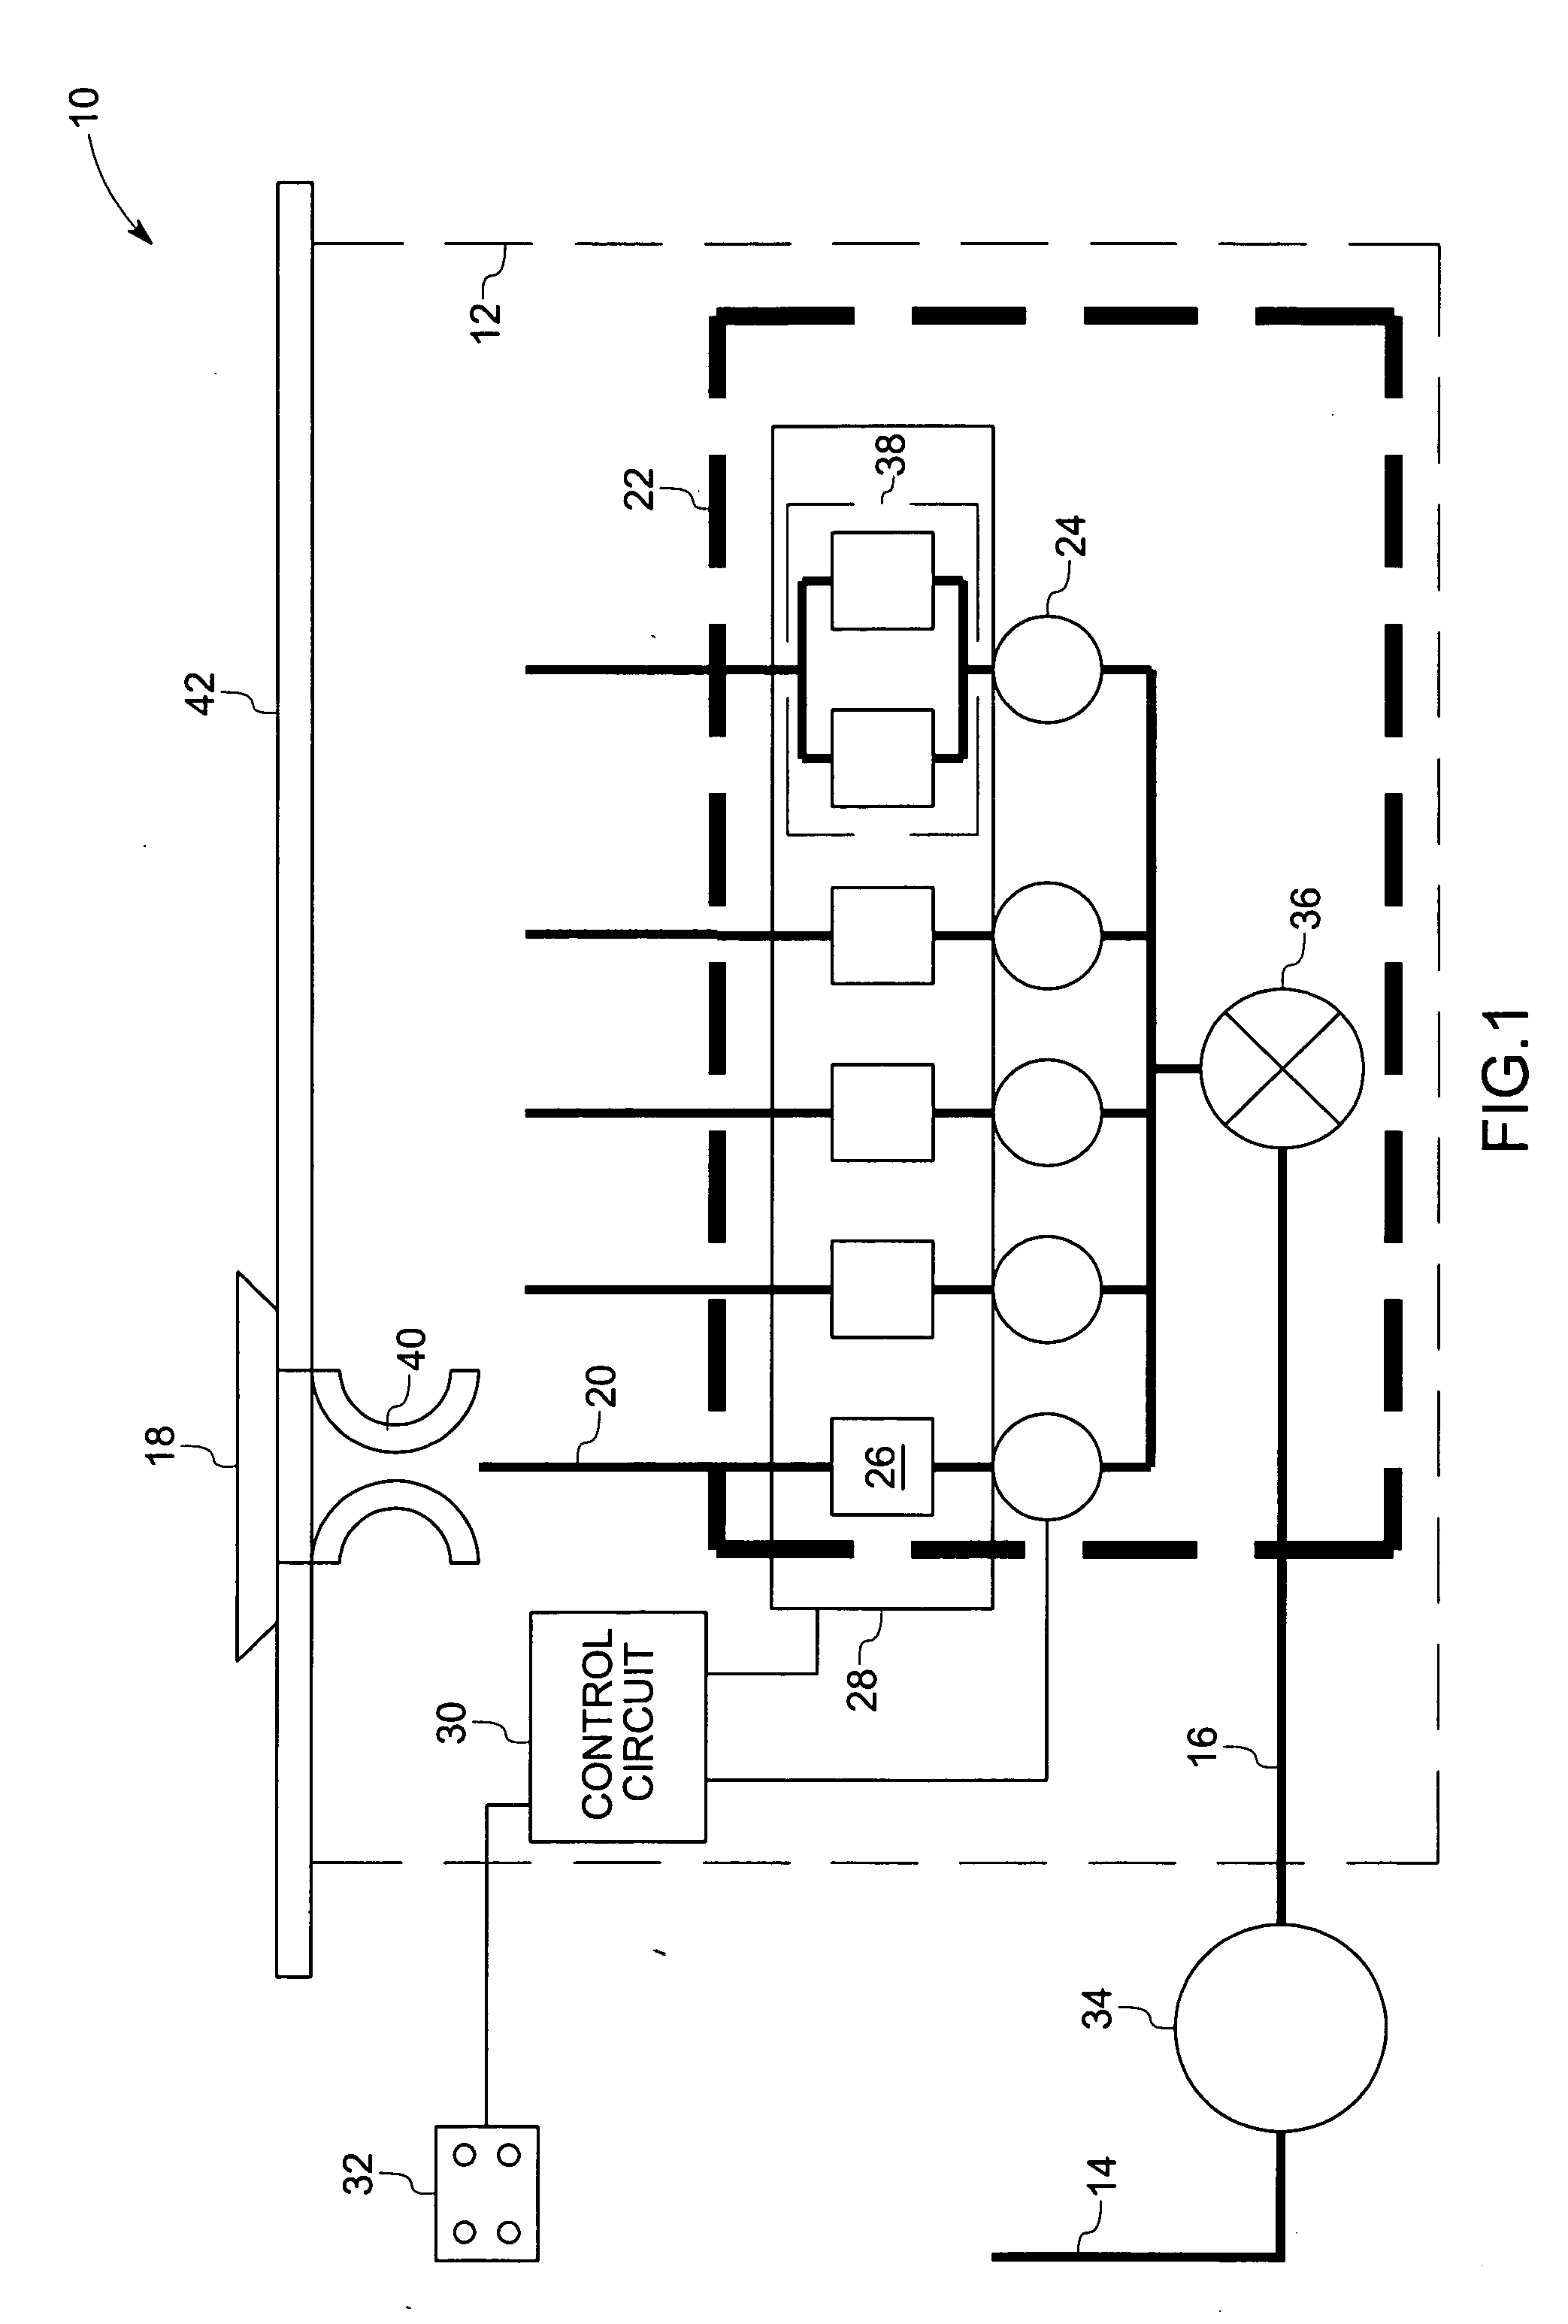 Control valve assembly for controlling gas flow in gas combustion systems